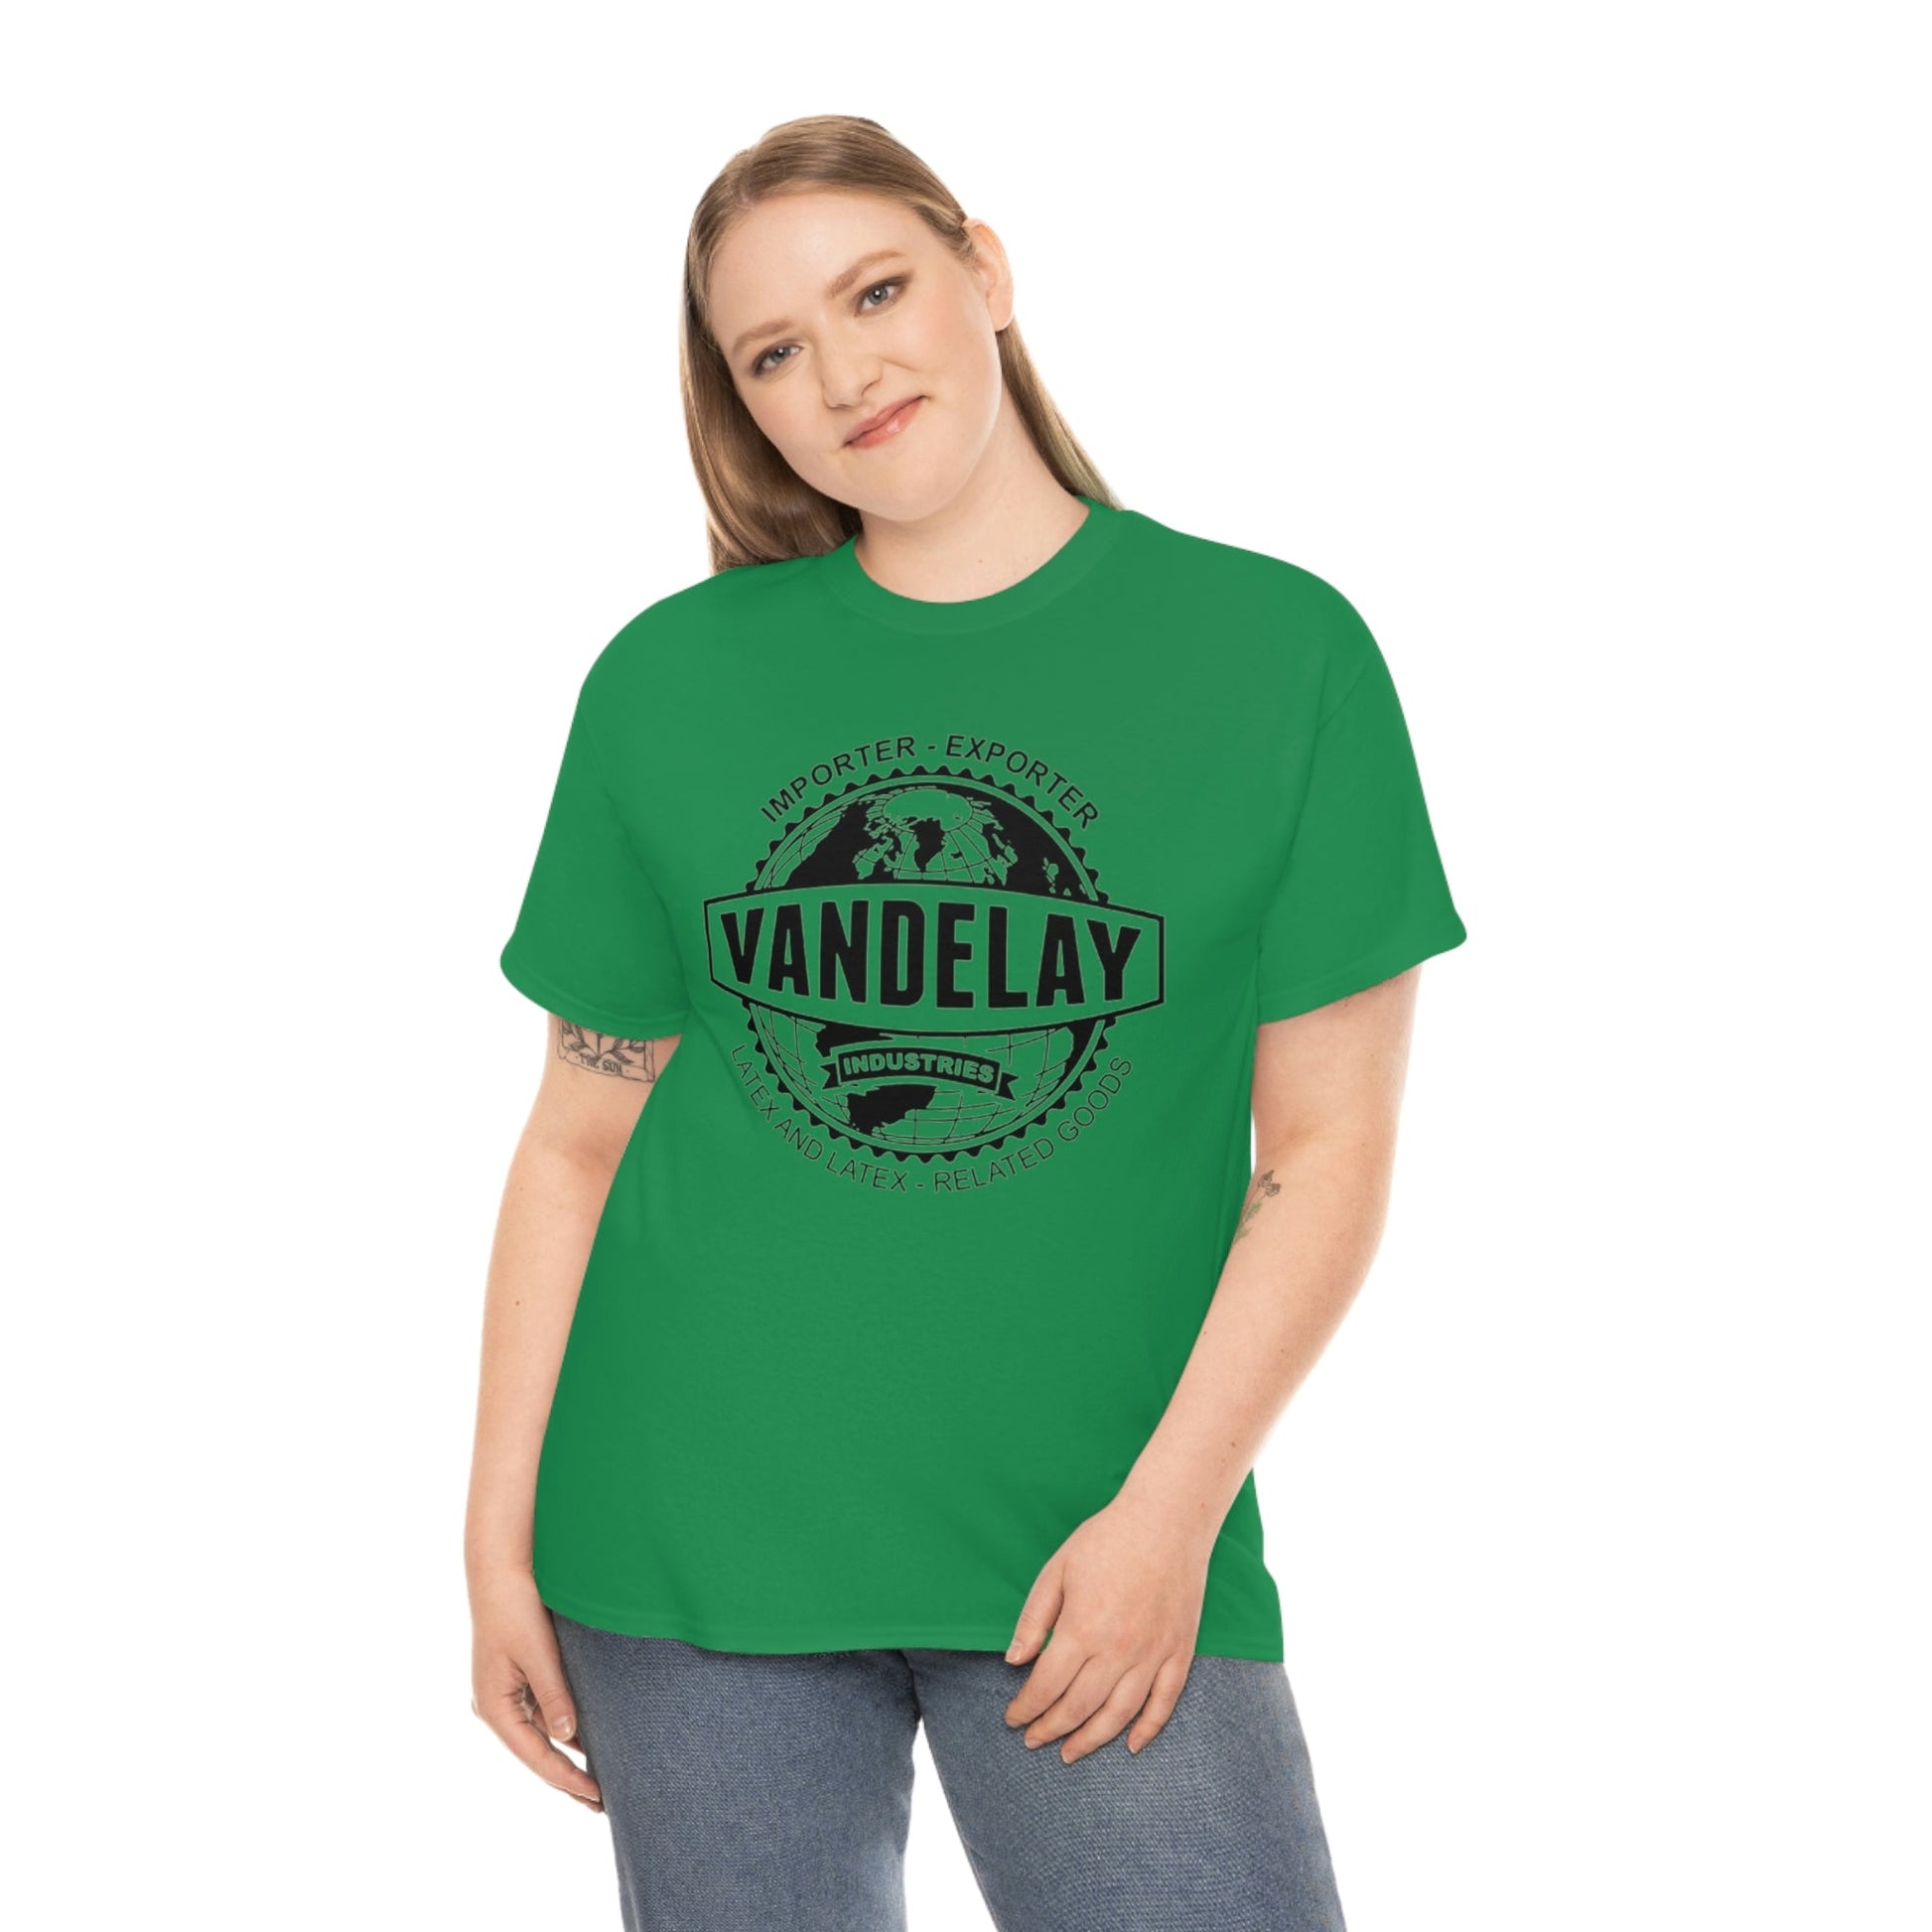 Vandelay Industries T-Shirt - Seinfeld Inspired Tee for Fans of George Costanza's Fake Company - RetroTeeShop